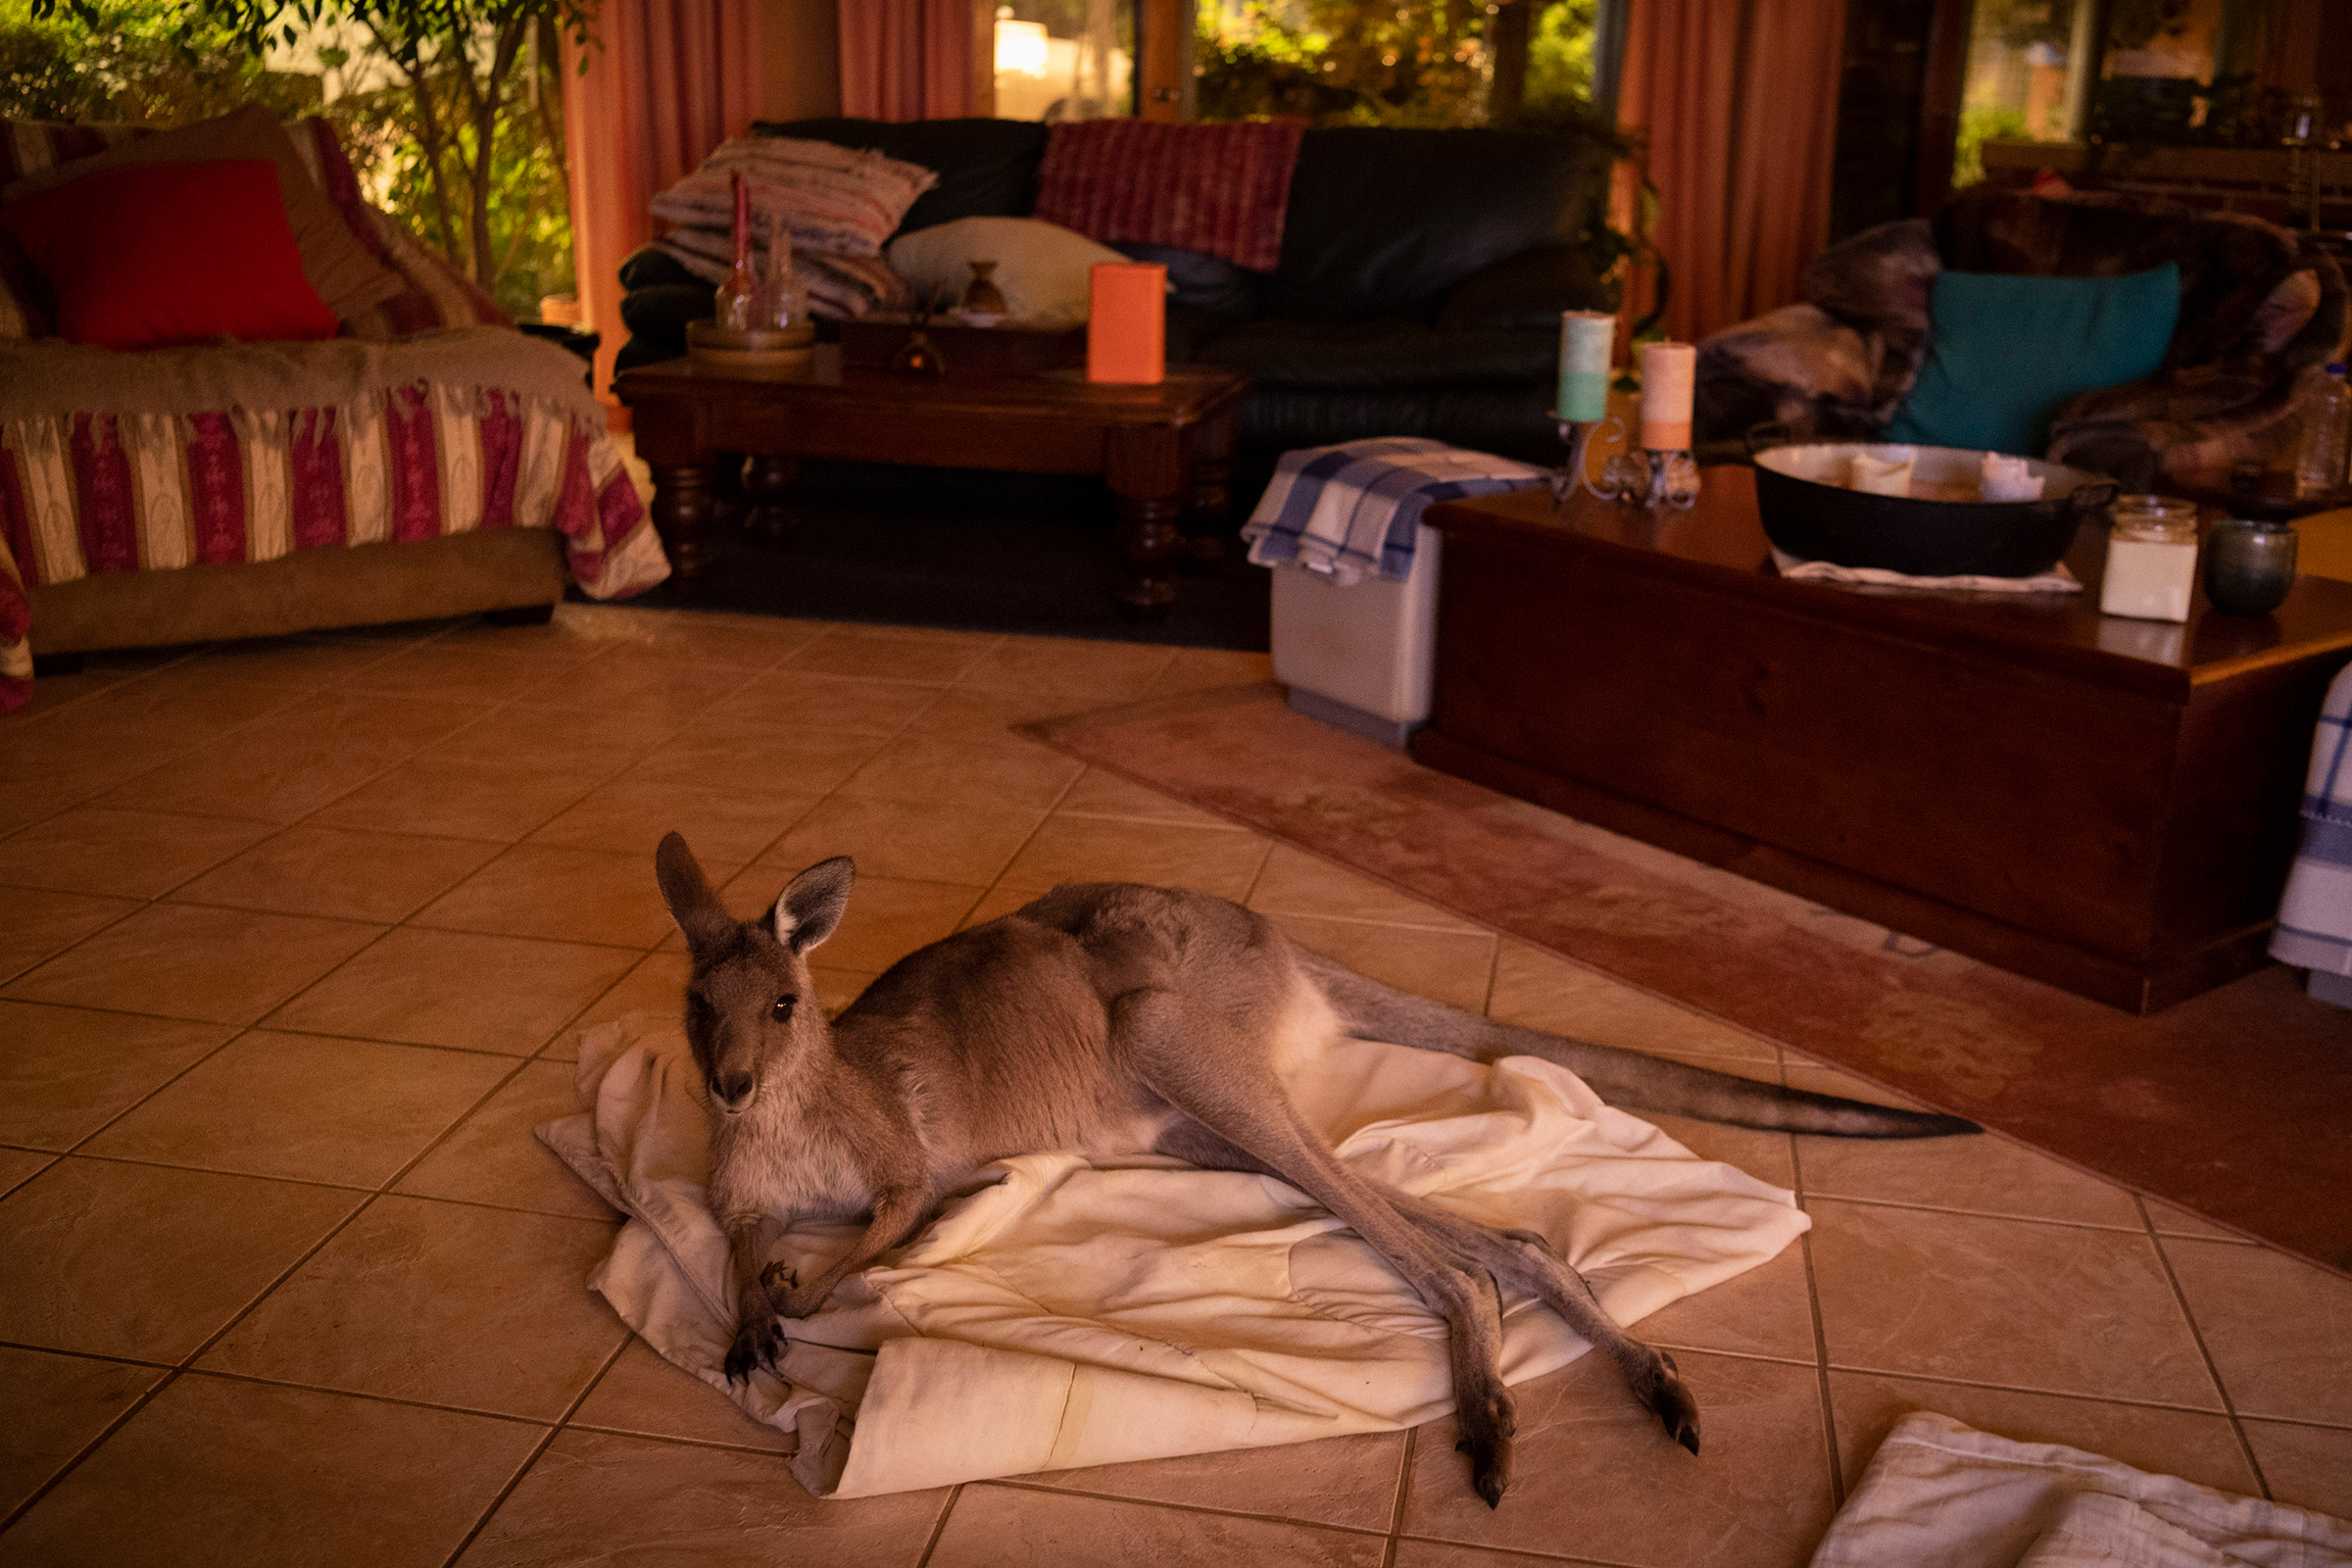 Mim, a female Eastern Grey Kangaroo, was hand-fed by a local family and decided to take shelter in their home on the outskirts of Kulnura, New South Wales, on Dec. 6, 2019. (Matthew Abbott—The Guardian/eyevine/Redux)